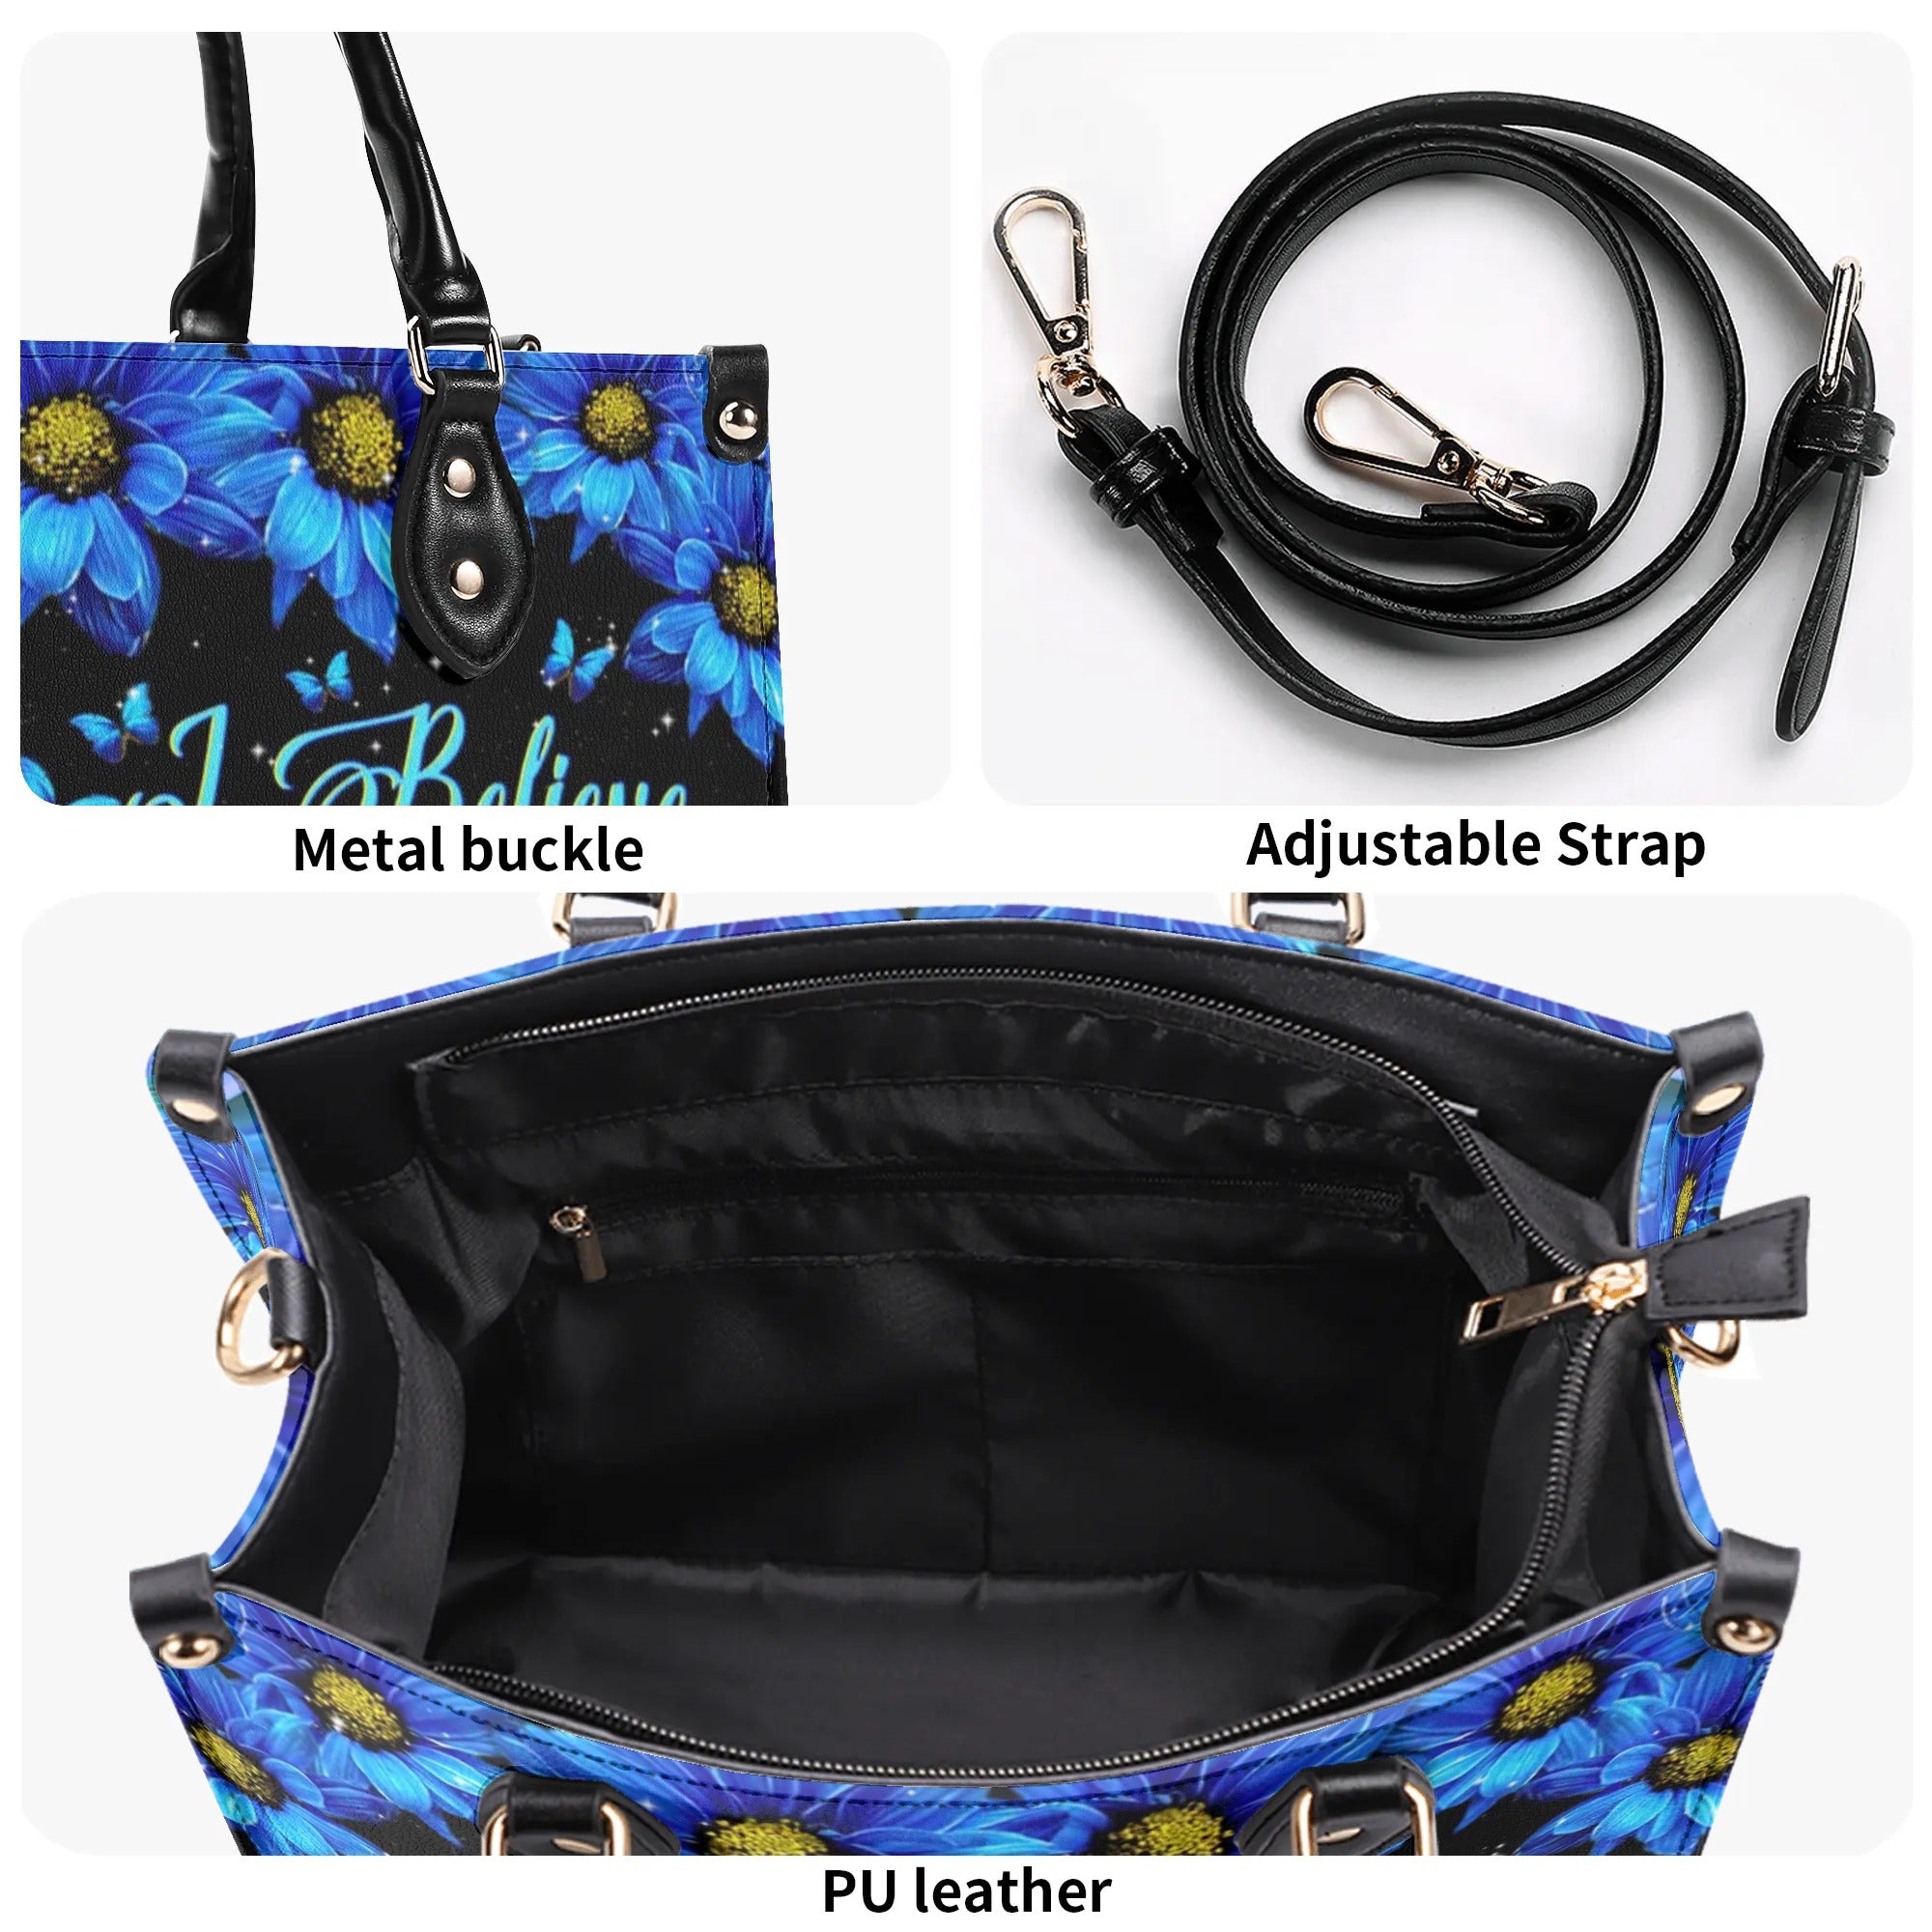 I BELIEVE THERE ARE ANGELS AMONG US BUTTERFLY LEATHER HANDBAG - TLNT1806244